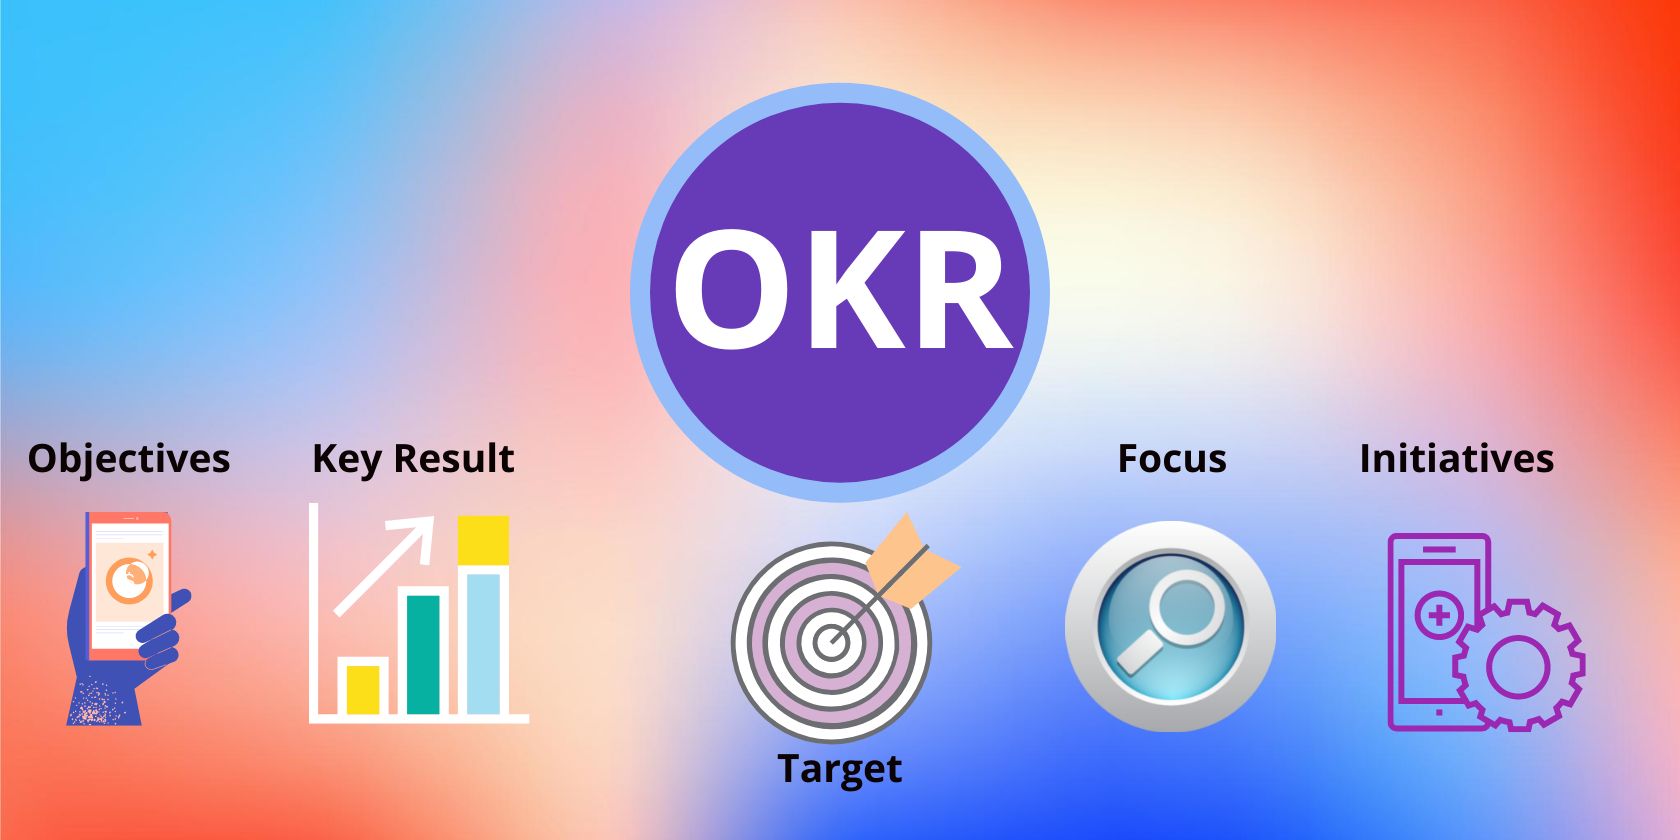 An illustration of OKR and its components